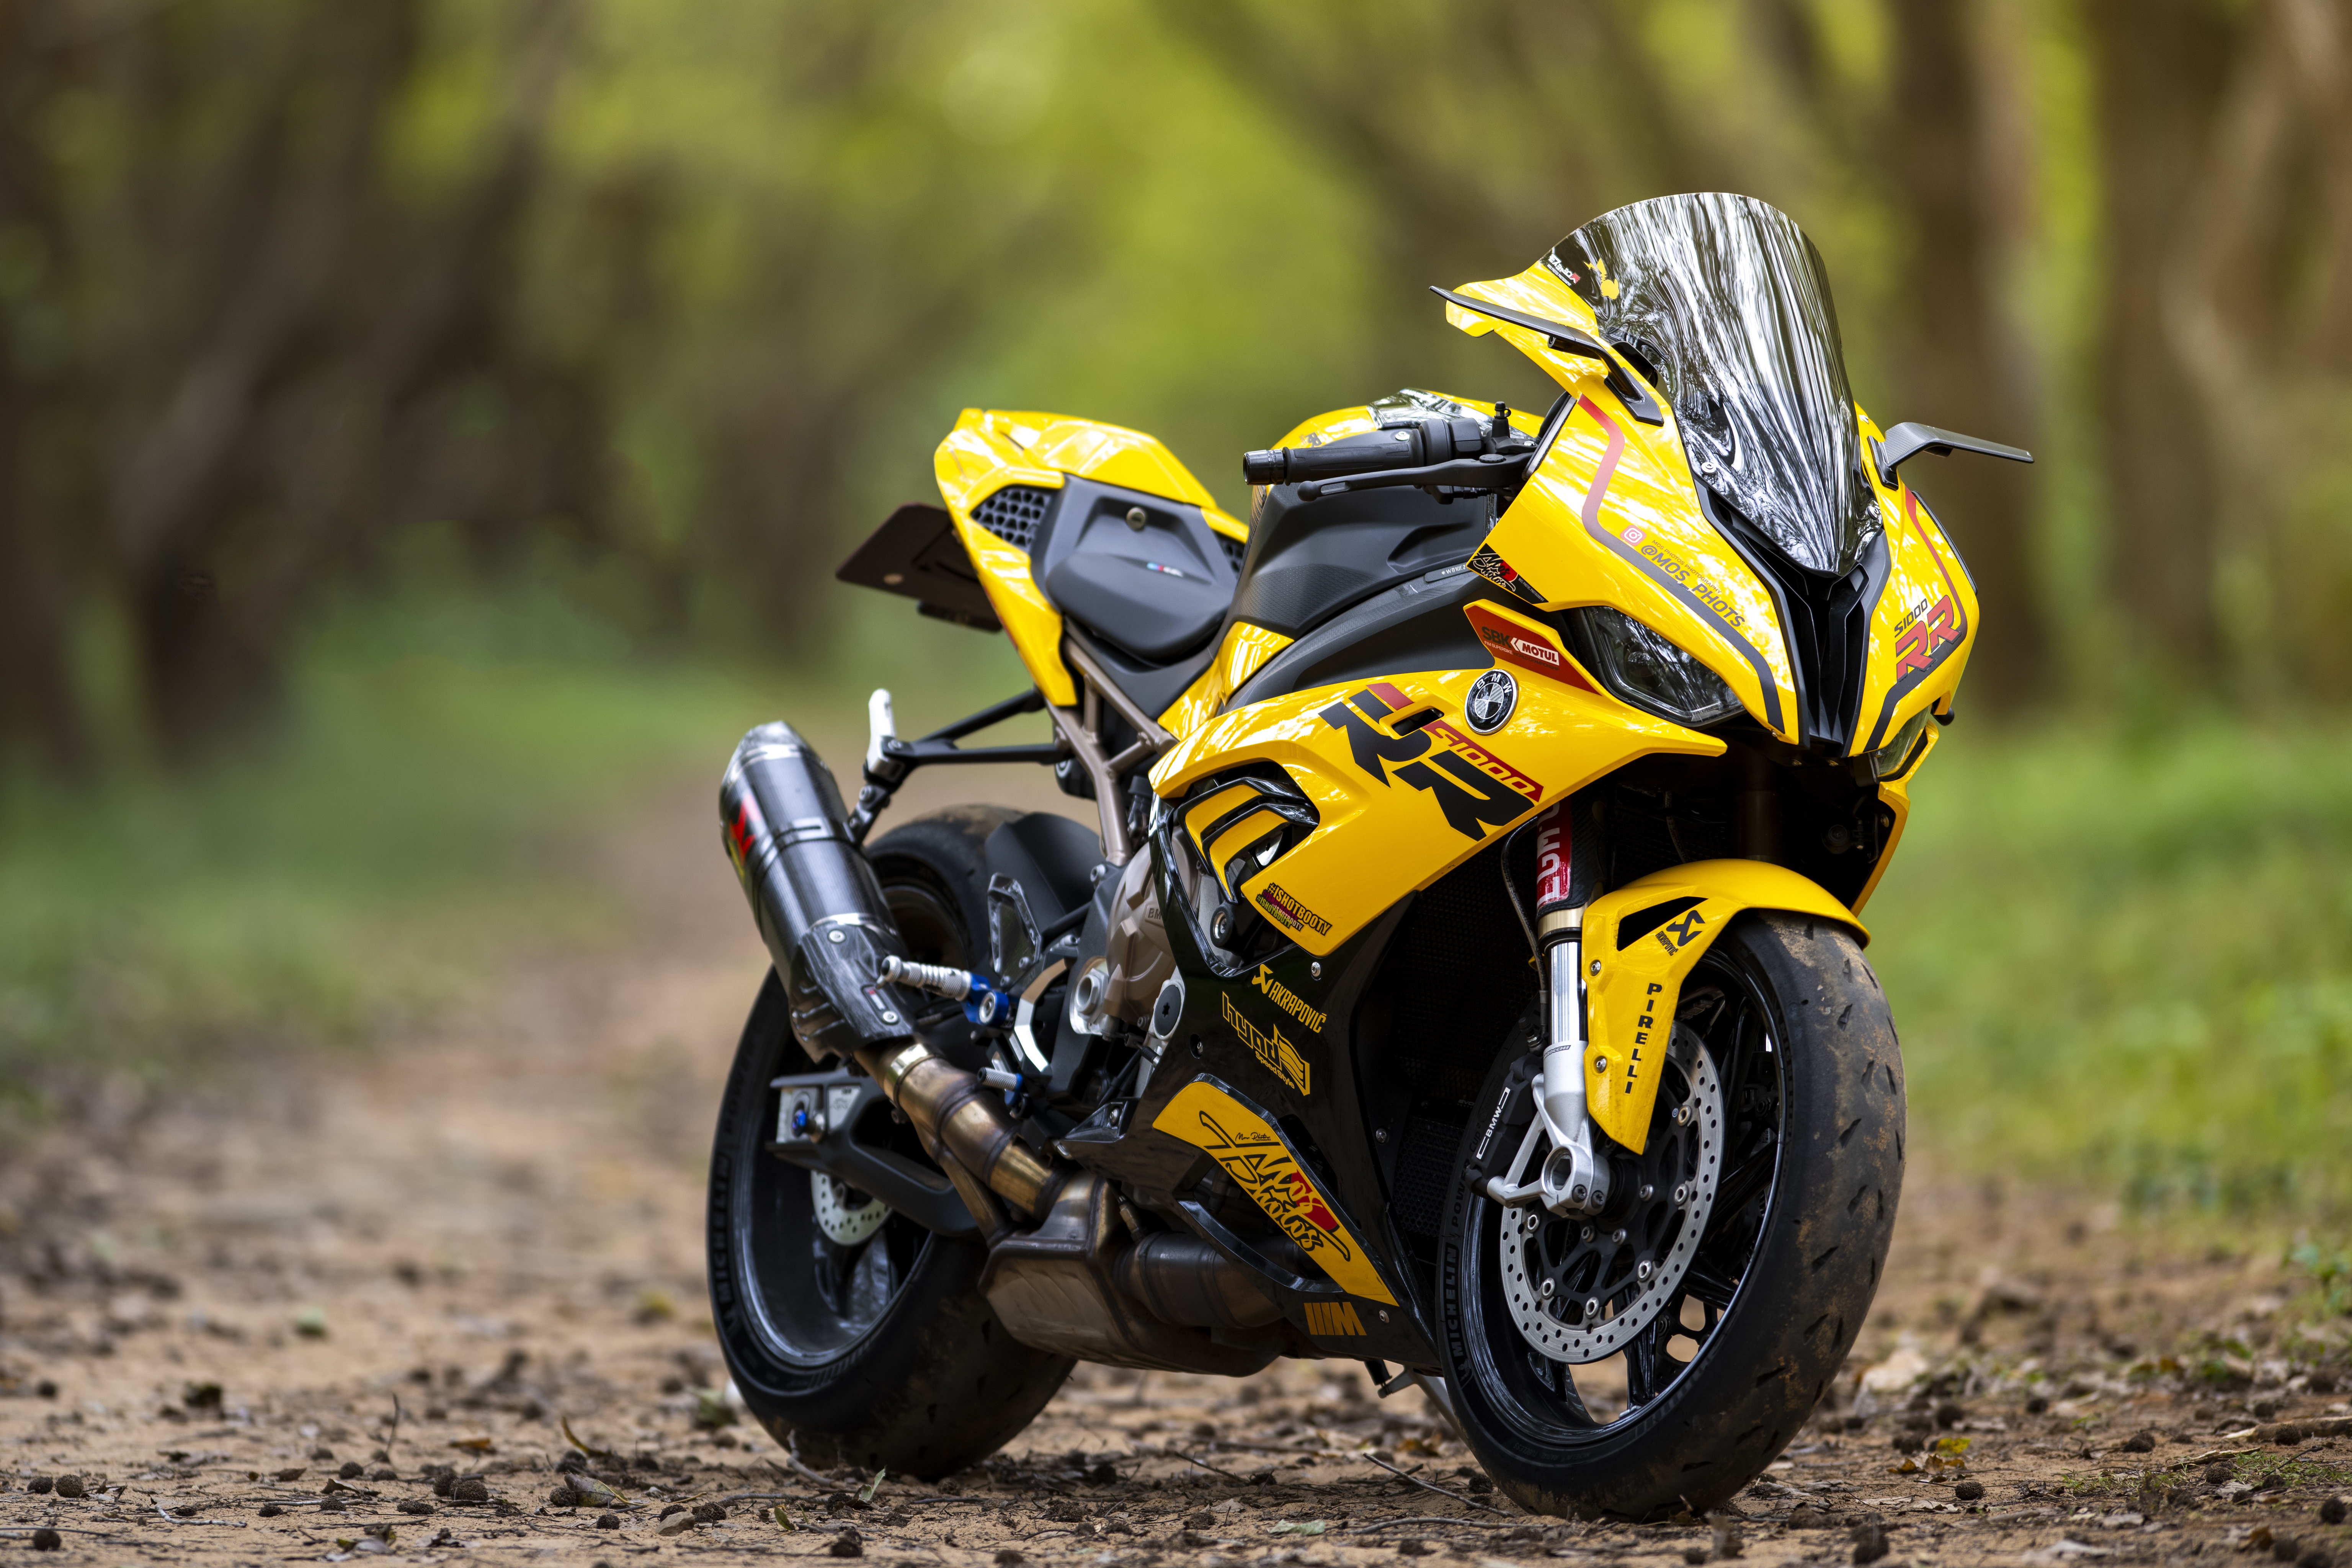 bmw s1000rr, bmw s1000, motorcycles, motorcycle, vehicles